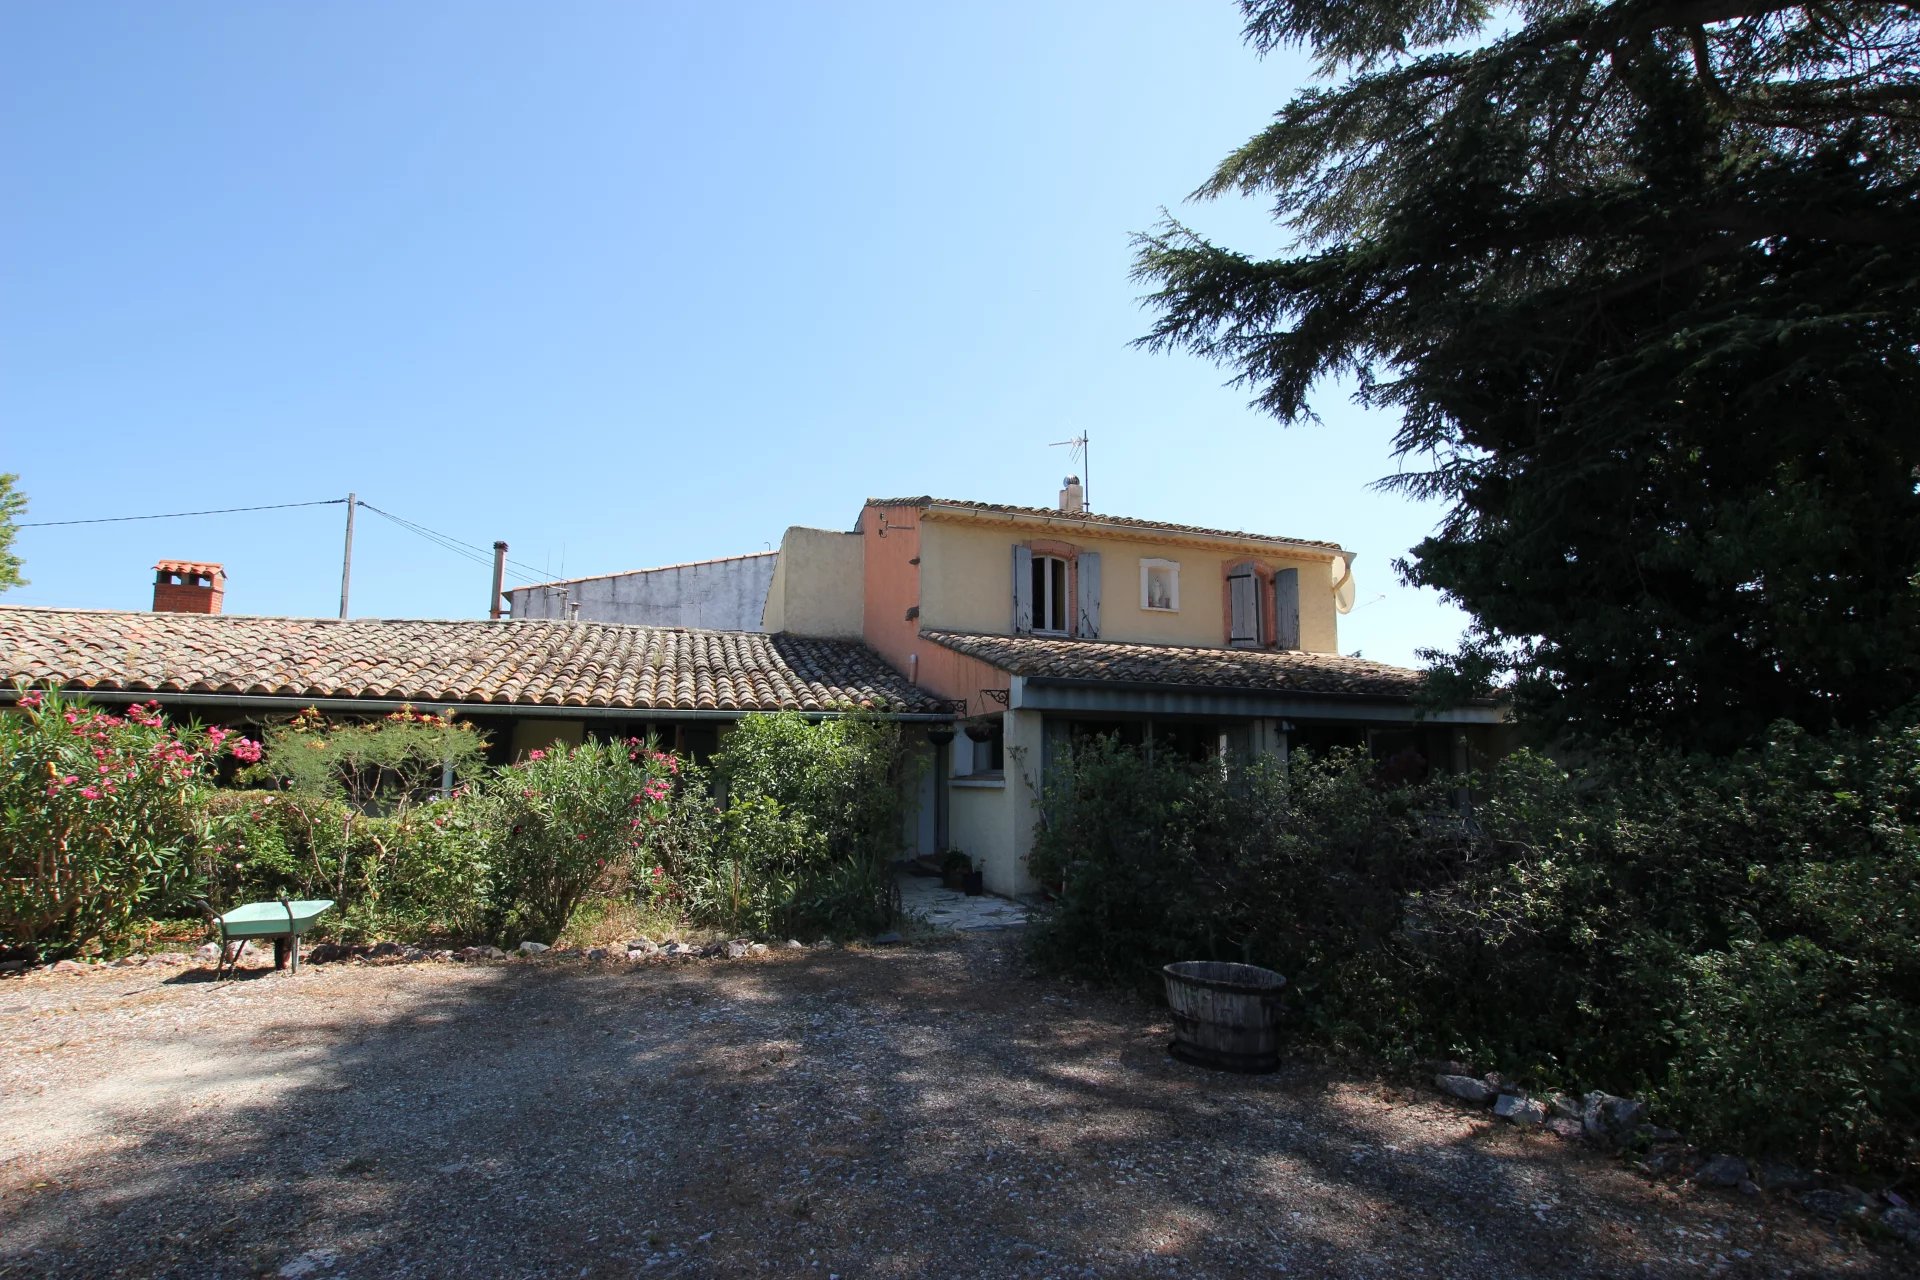 2 Houses and barn with garden and pool on the outskirts of Caunes Minervois